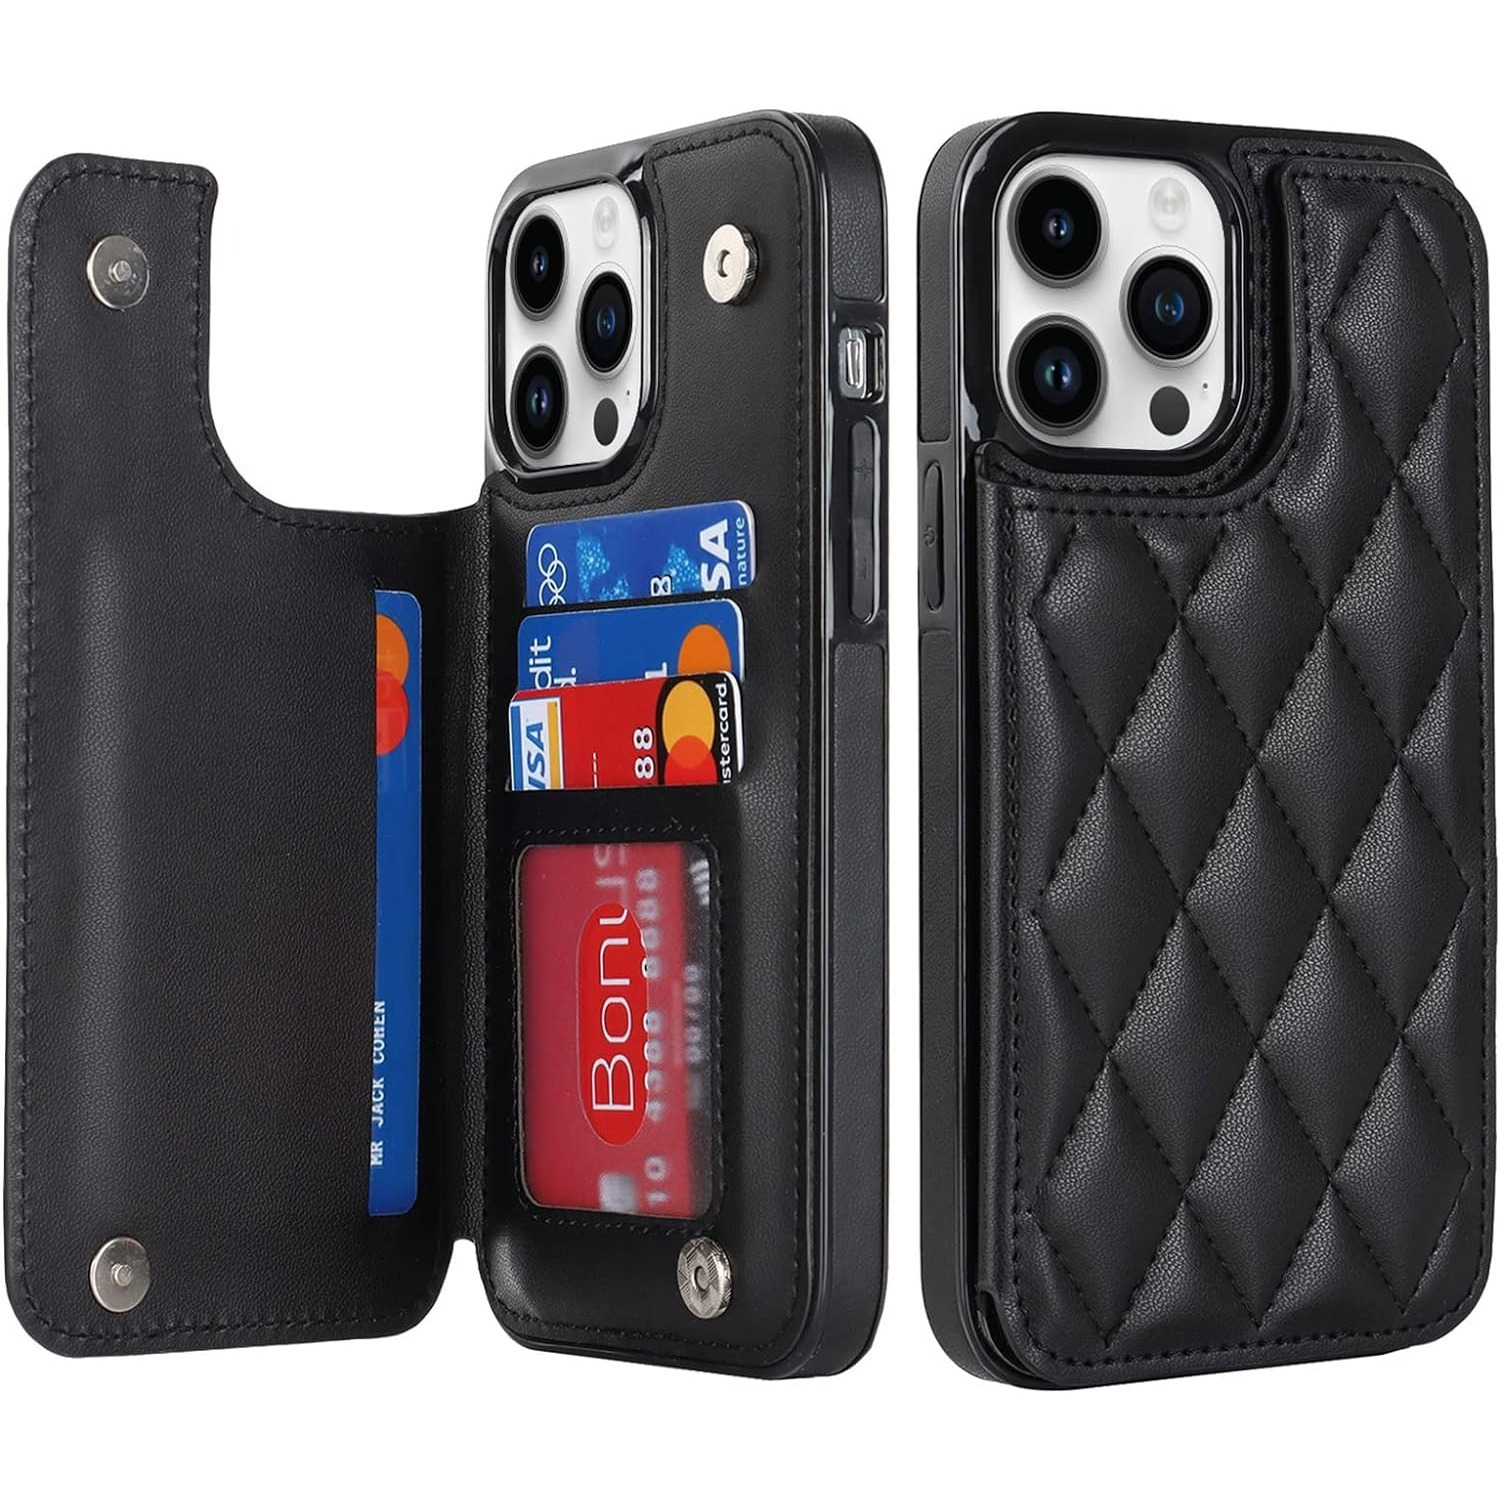 

Flip Leather Wallet Case For 15/15pro/15plus/15promax Phone Case With Pu Kickstand Card Holder Purse For Women Girls, Double Magnetic Clasp Durable Shockproof Protective Cover